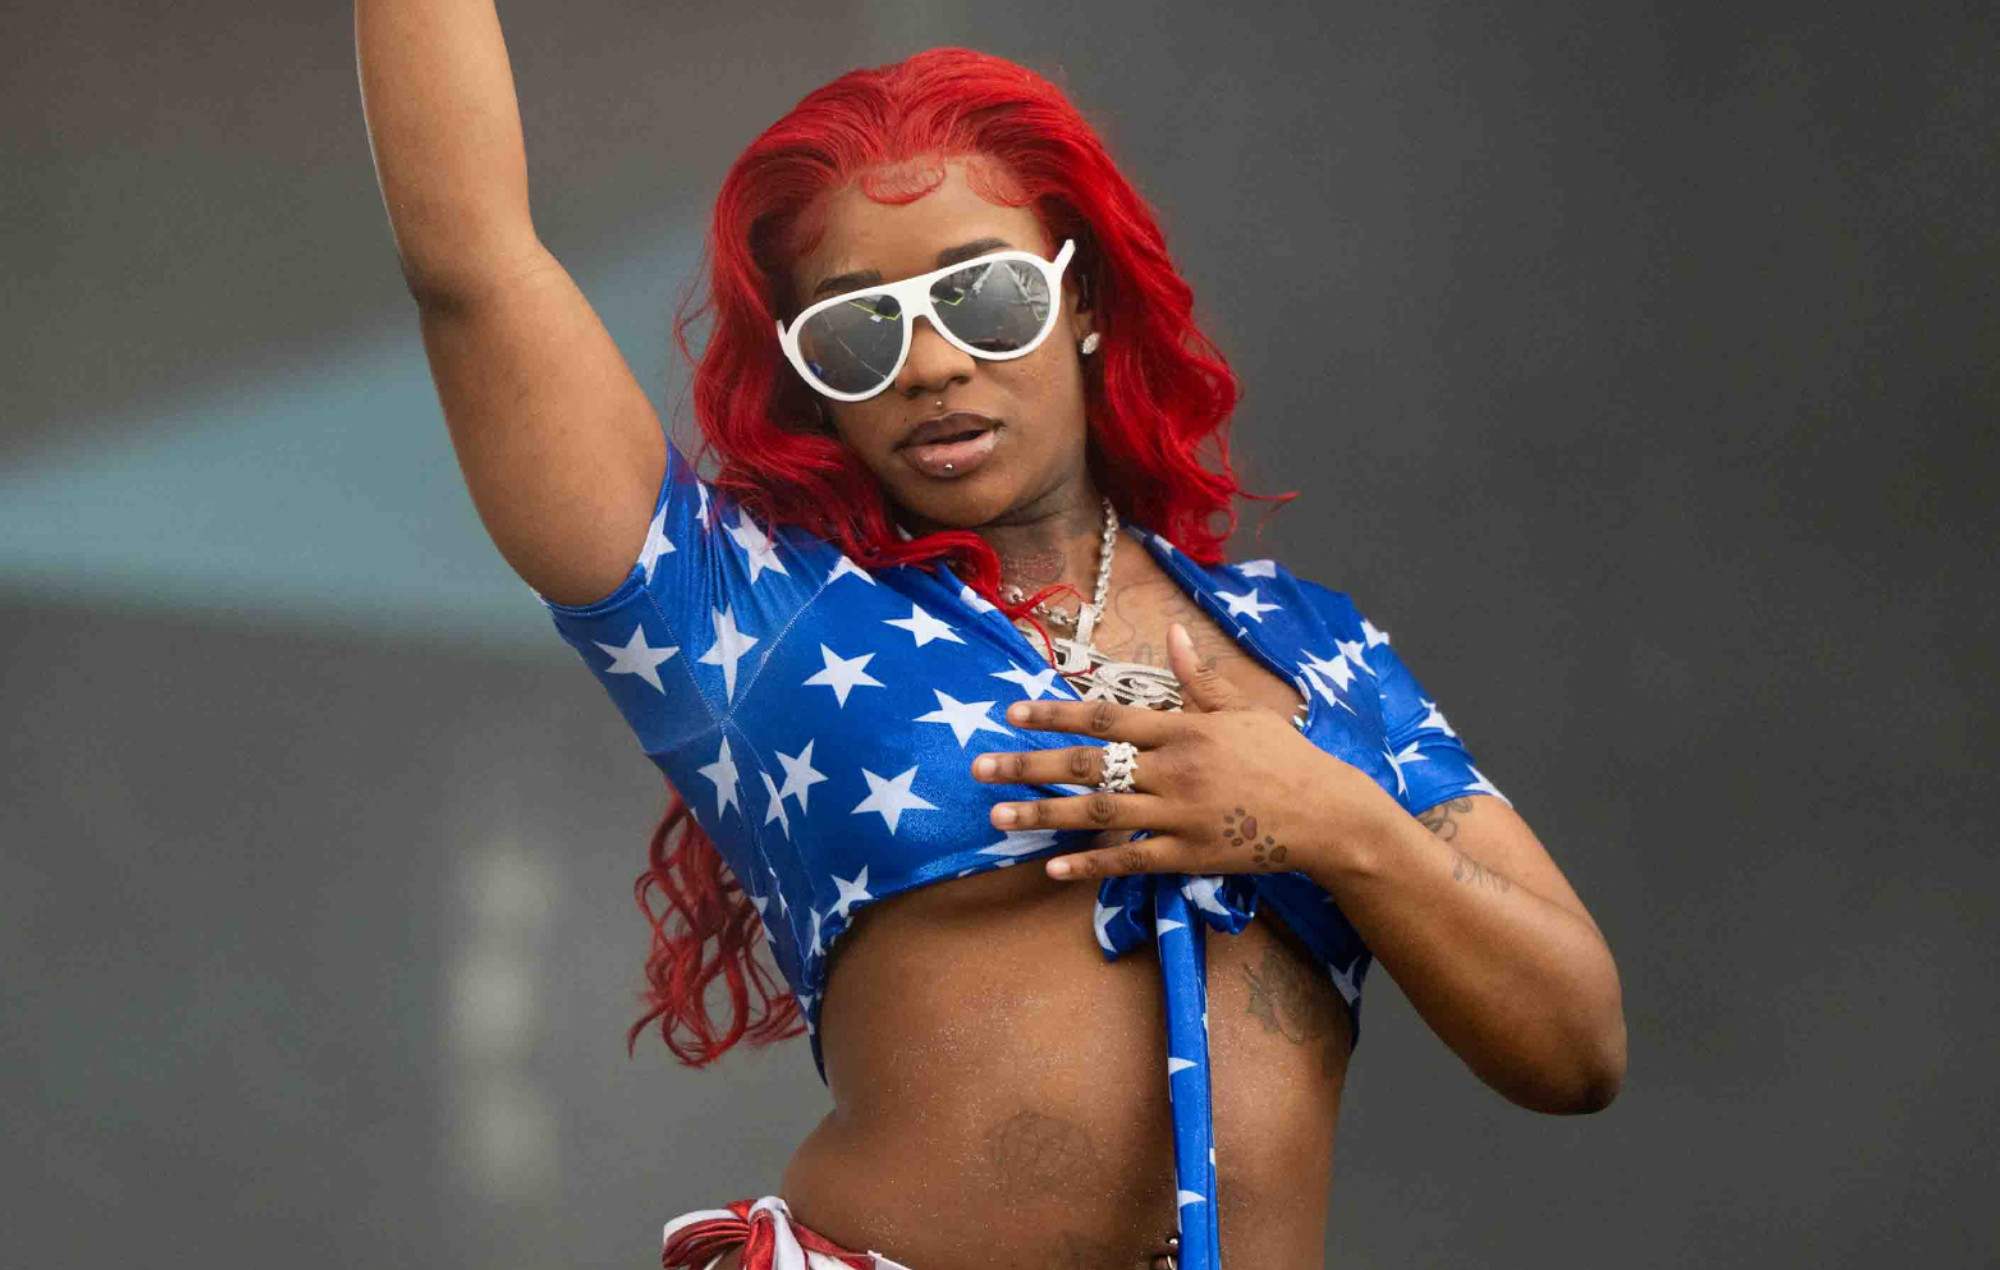 Sexyy Red claims she got kicked off school premises for “smelling like weed”